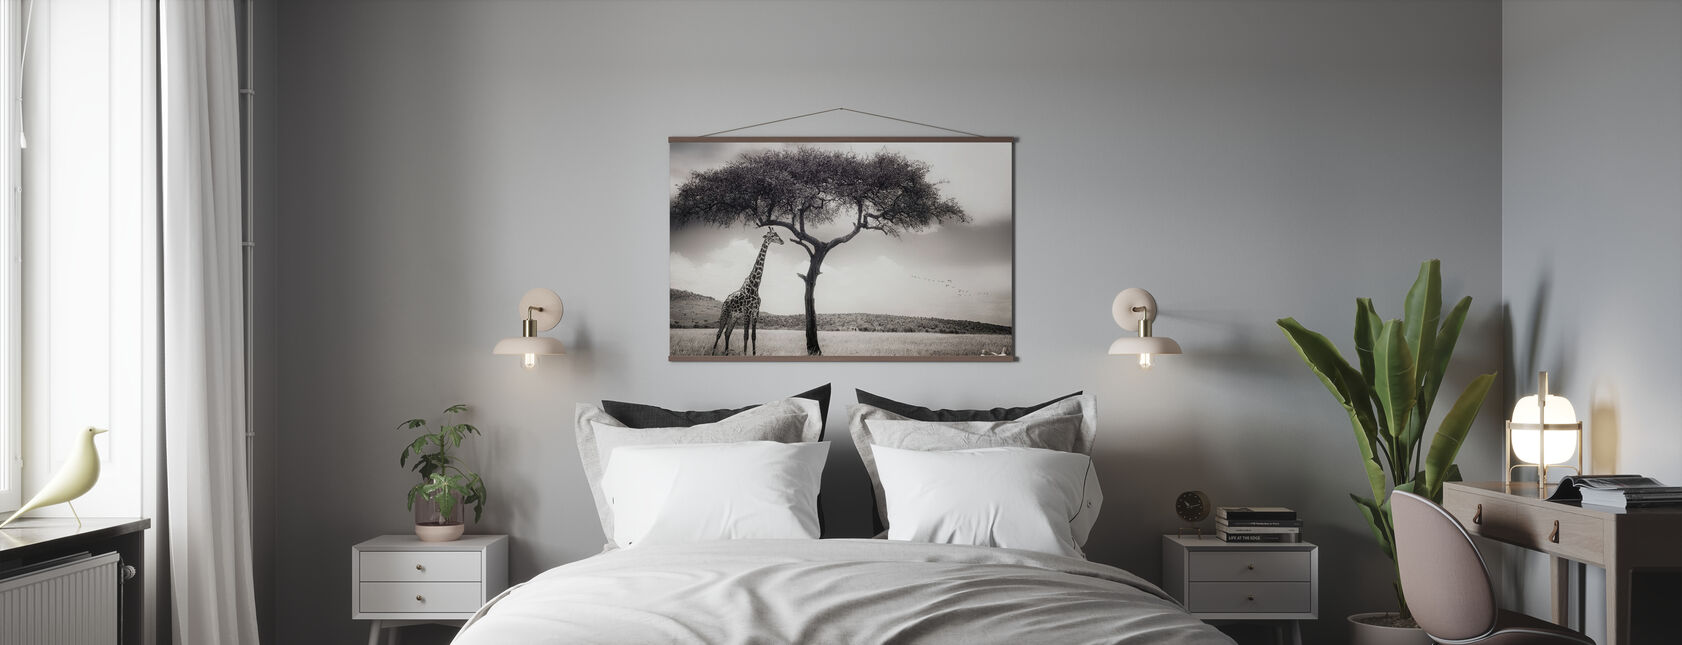 Under the African Sun - Poster - Bedroom